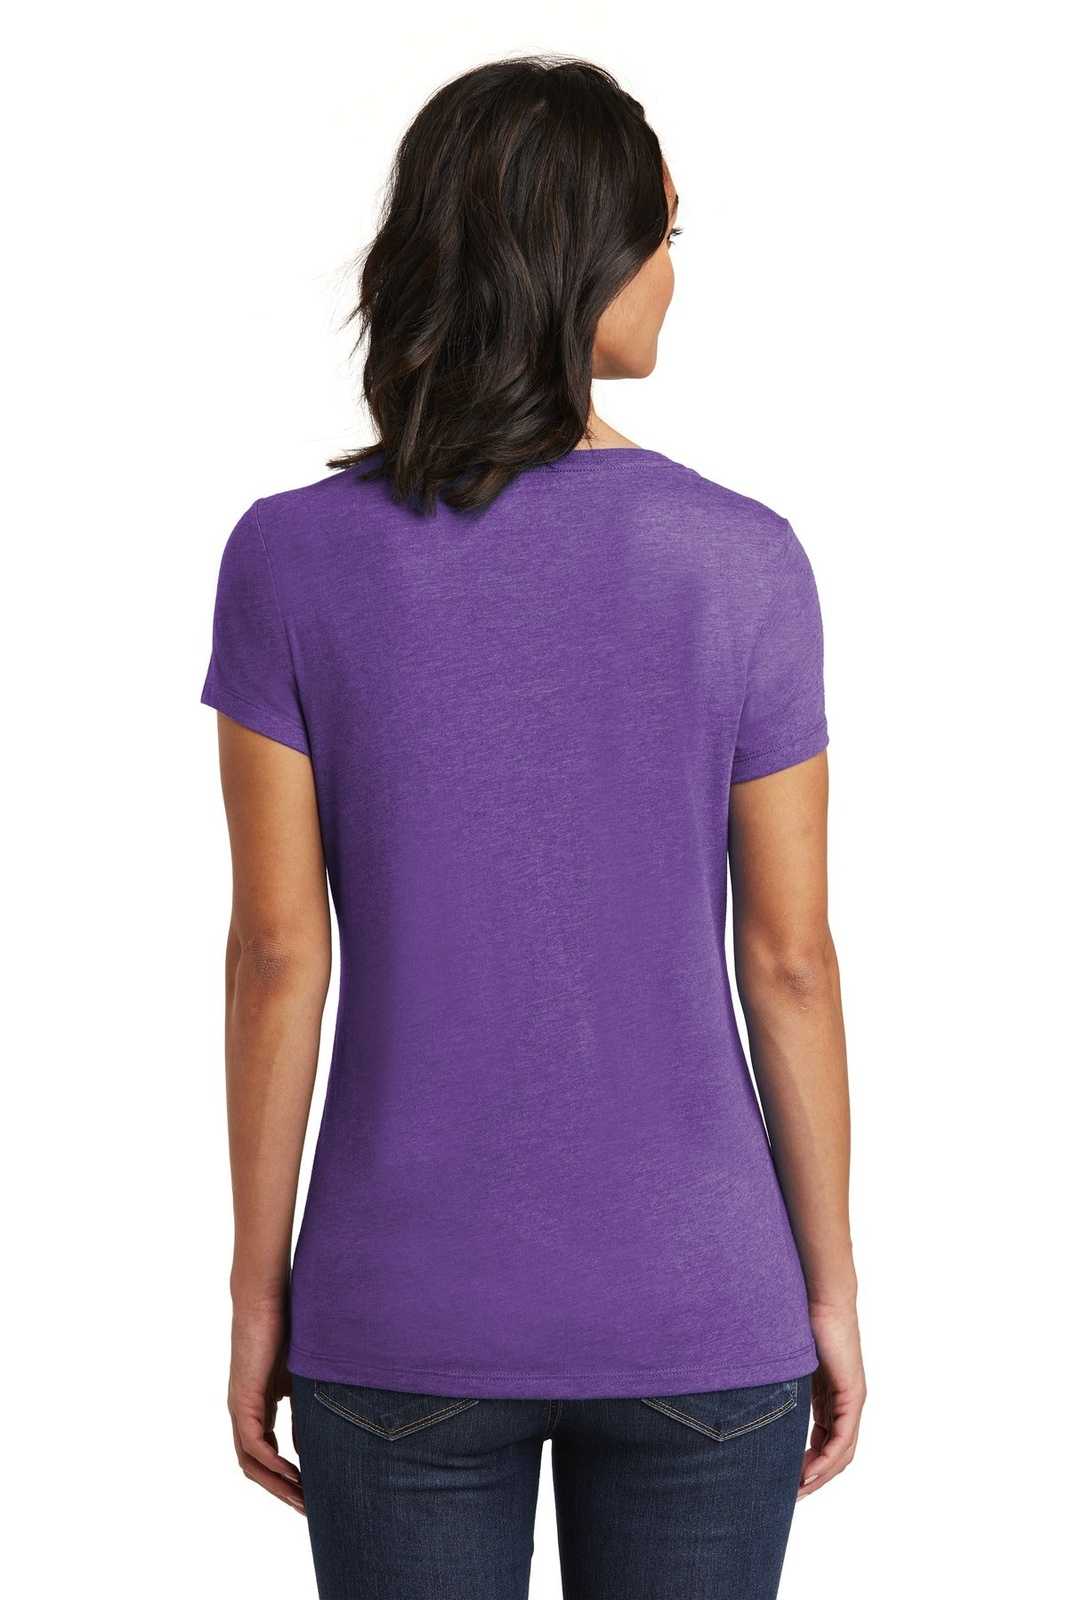 District DT6503 Women's Very Important Tee V-Neck - Heathered Purple - HIT a Double - 1